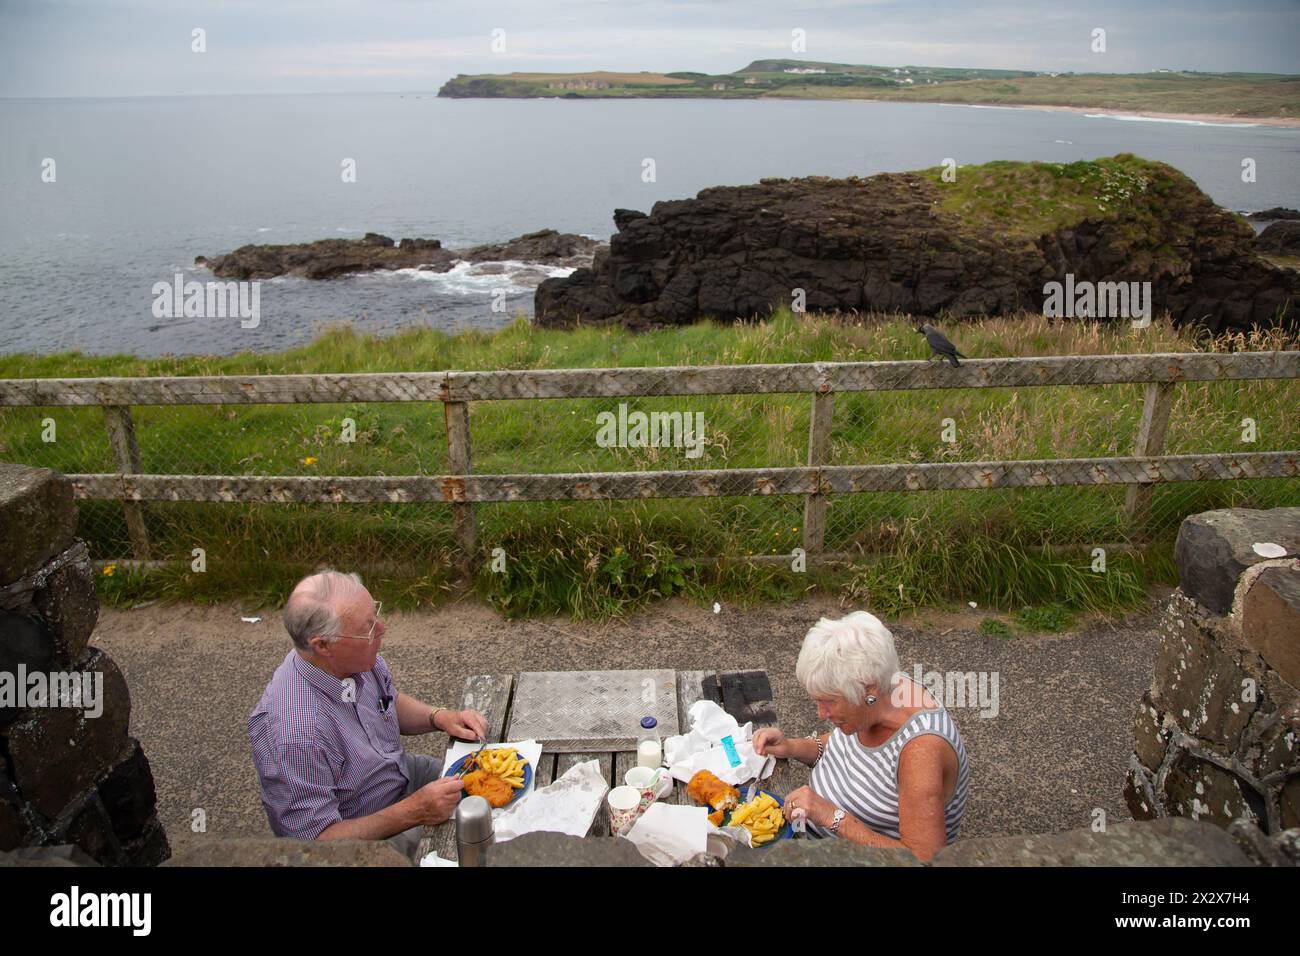 16.07.2019, Portballintrae, Northern Ireland, United Kingdom - Happy retired couple eating fish and chips with a view of the Irish Sea. 00A190716D116C Stock Photo